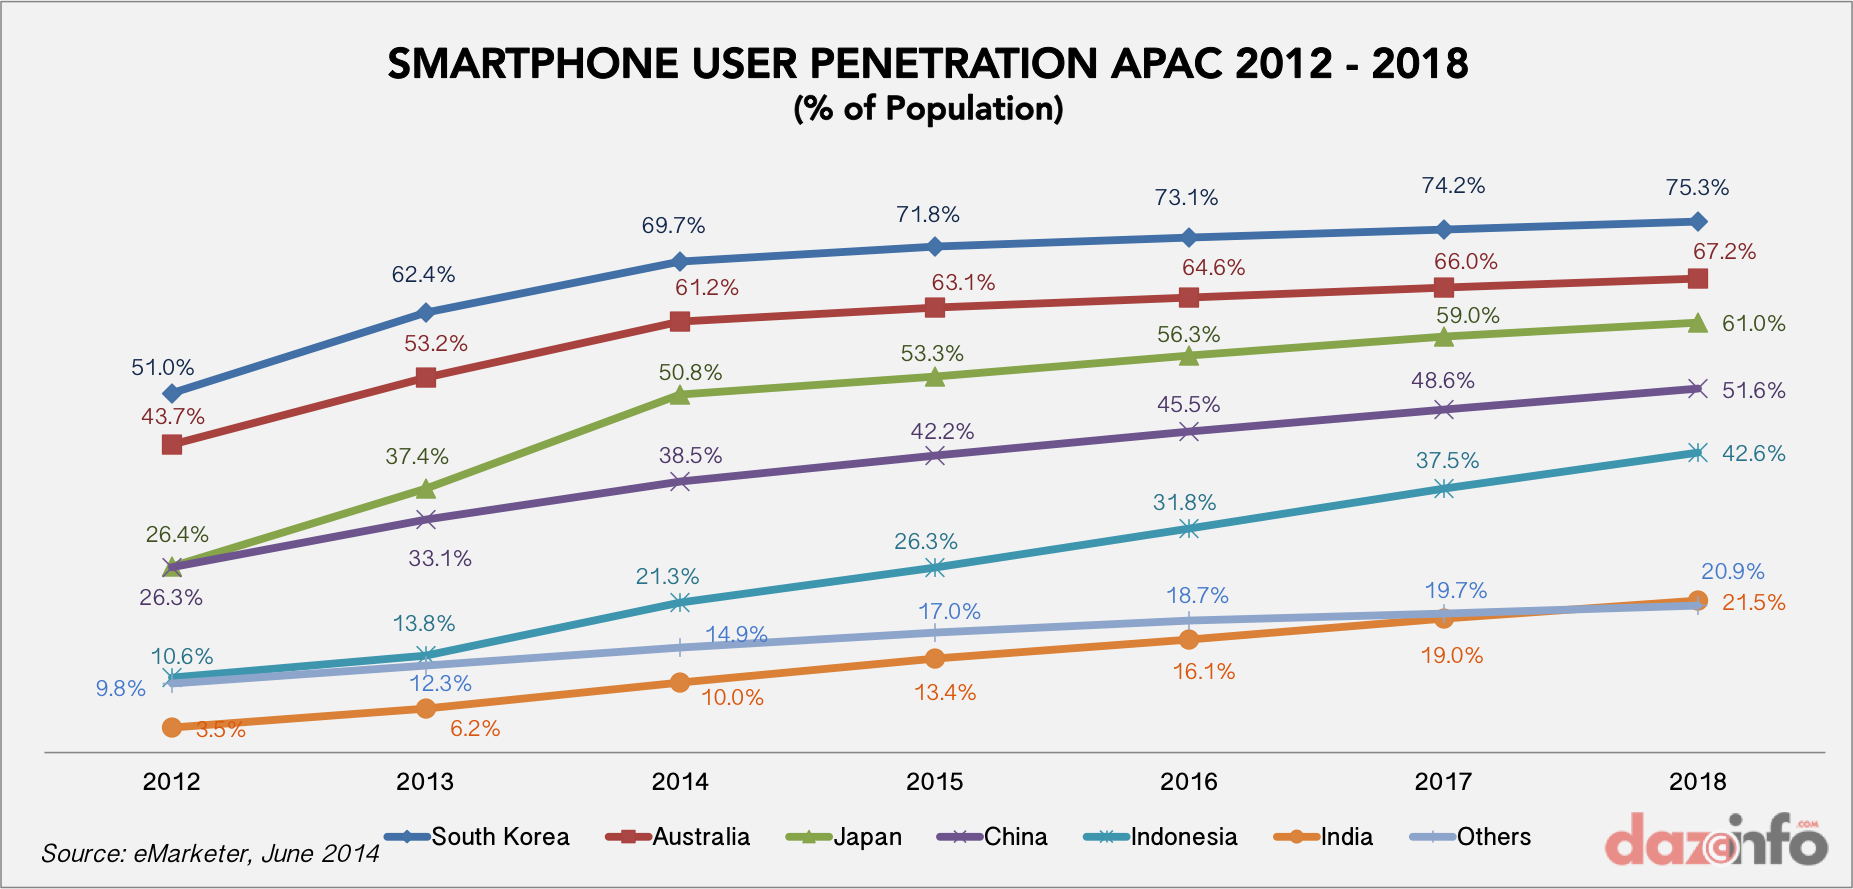 penetration Mobile in india phone